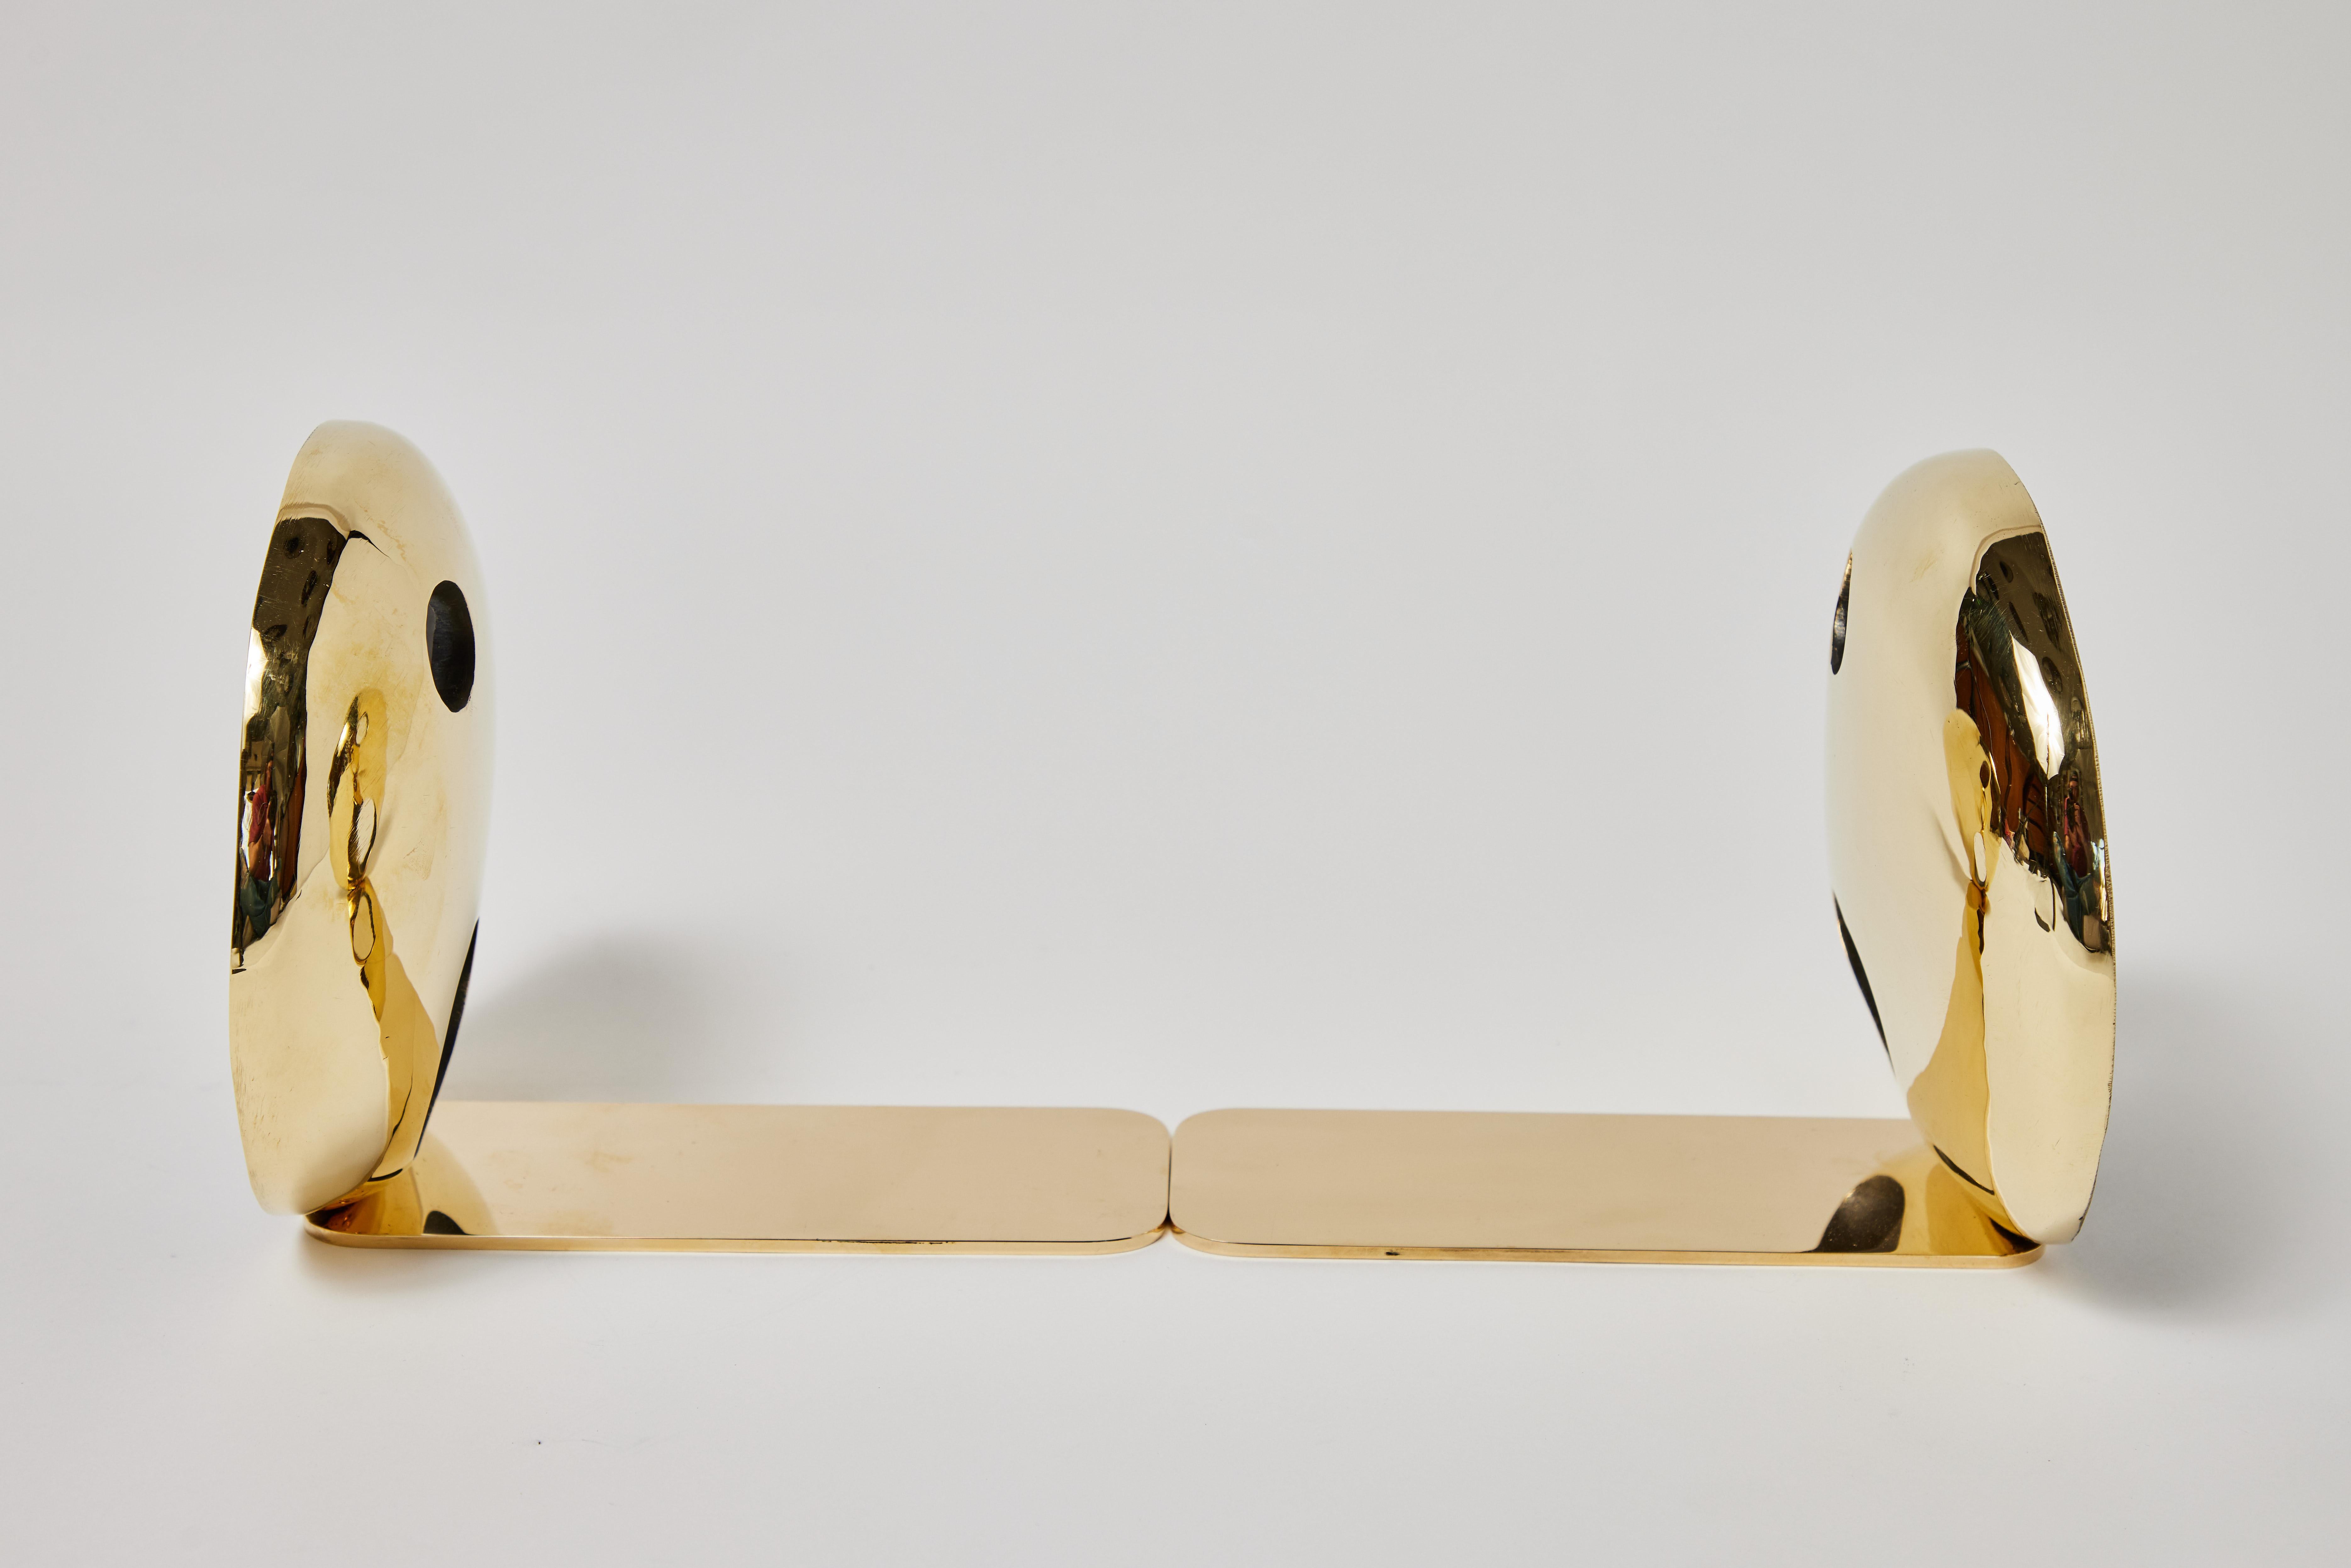 Pair of Large Carl Auböck Model #4101 'Melies' Patinated Brass Bookends For Sale 11